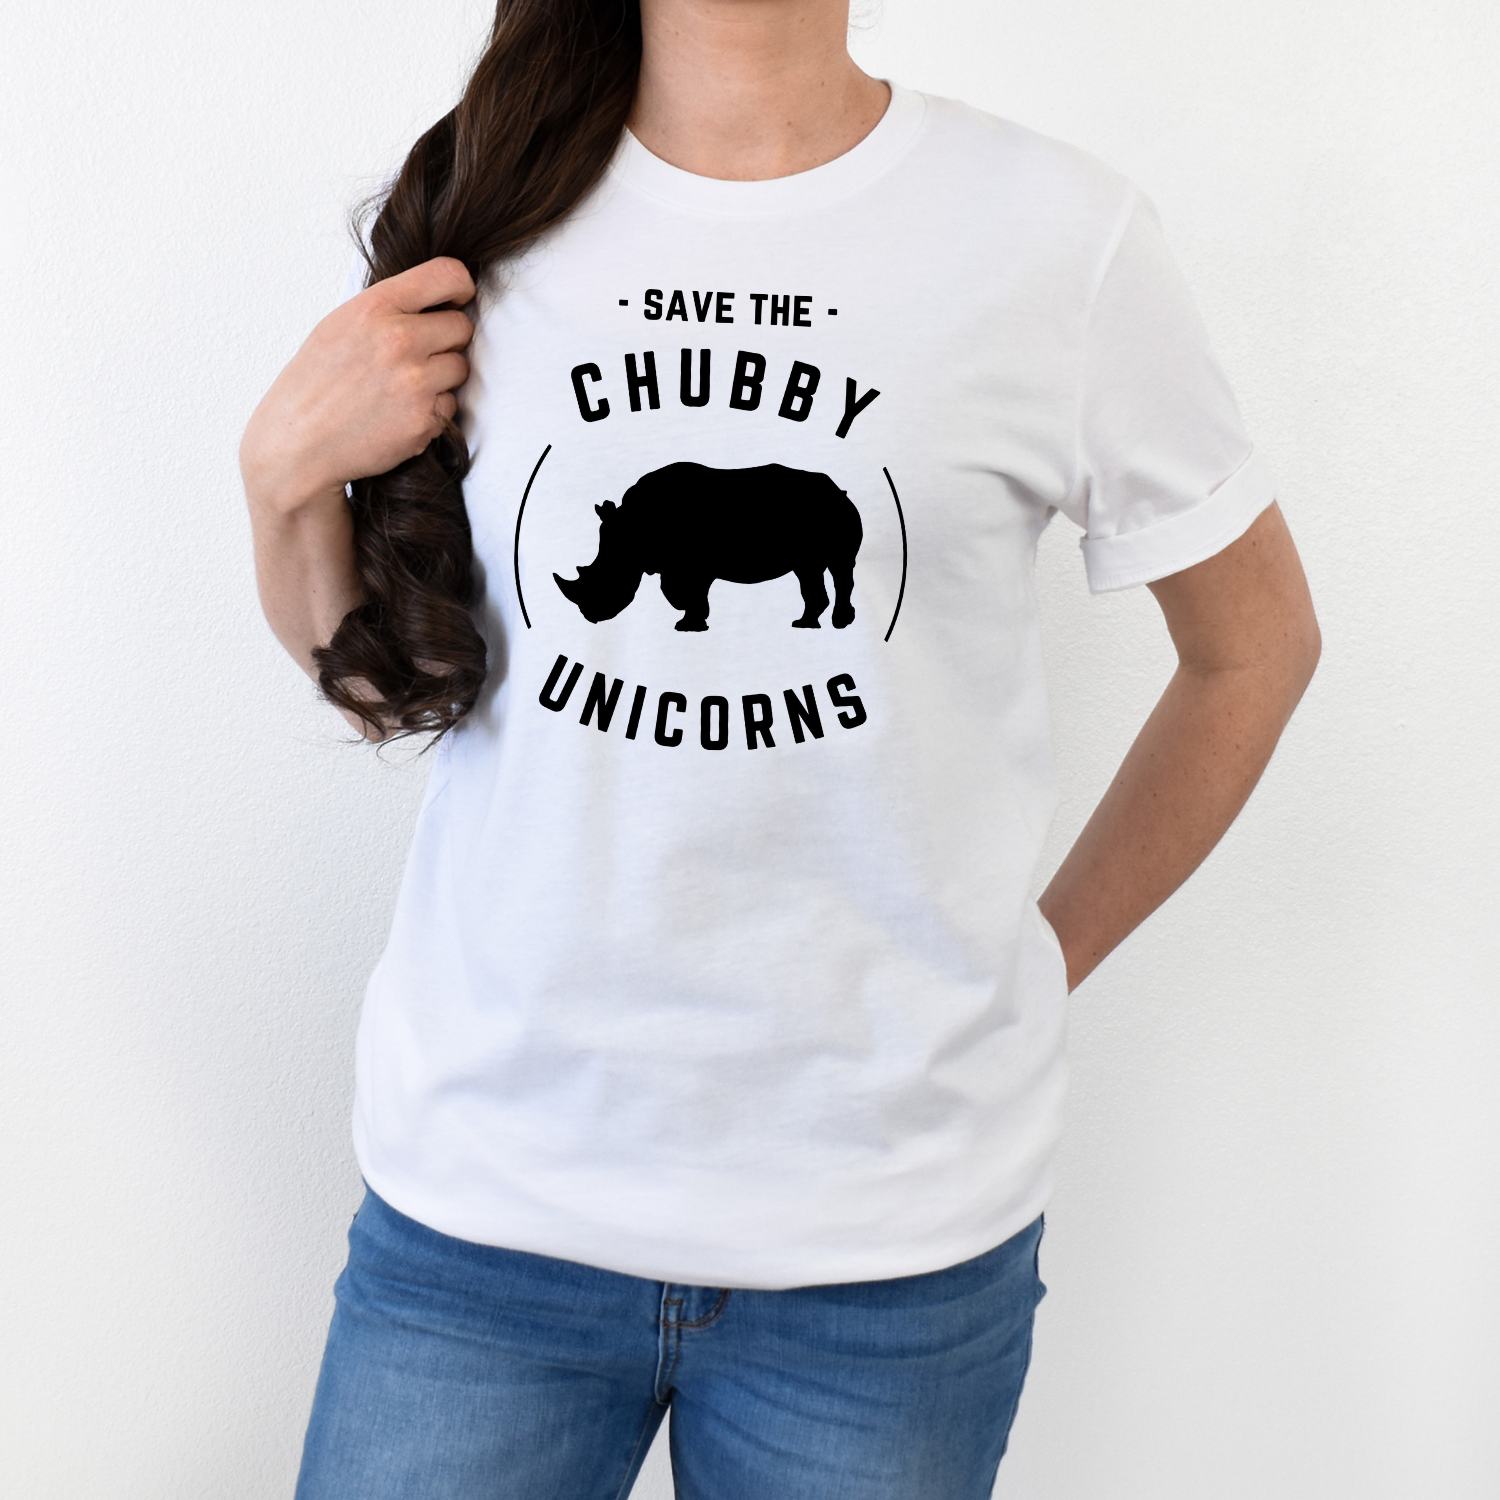 Save the Chubby Unicorns t-shirt being worn by a woman